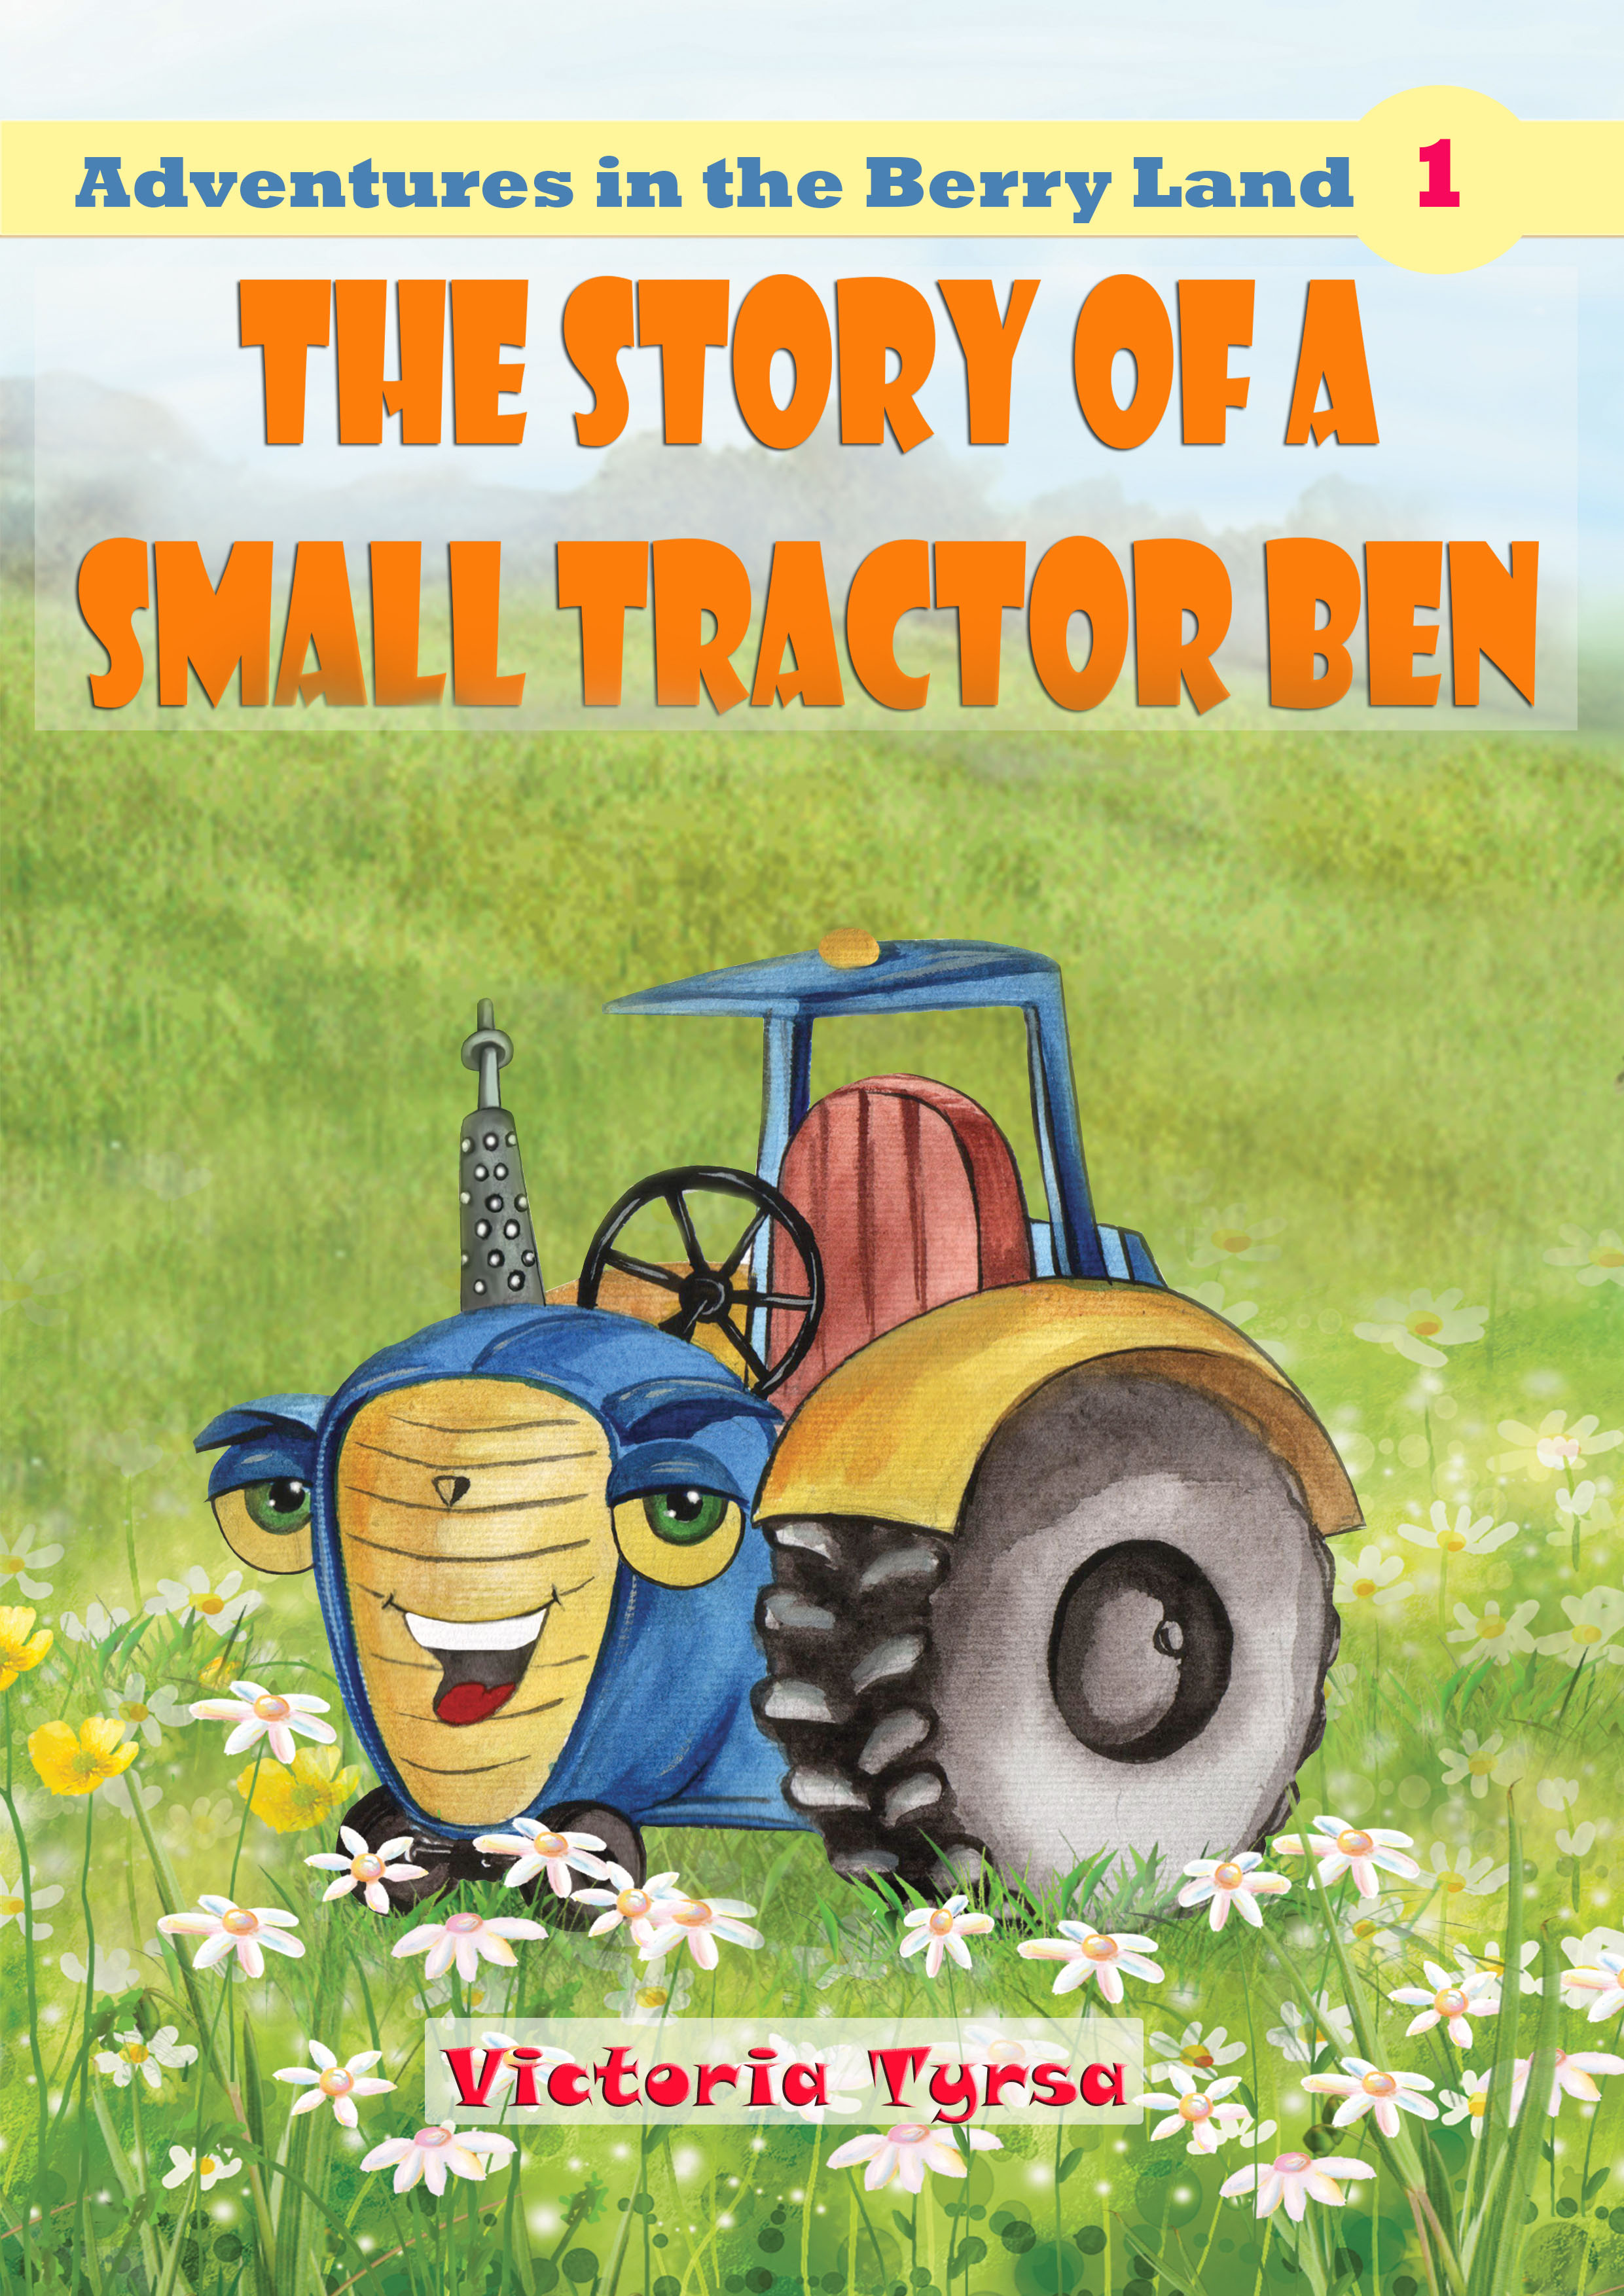 FREE: The story of a small tractor Ben (Adventures in the Berry Land Book 1) by Victoria Tyrsa